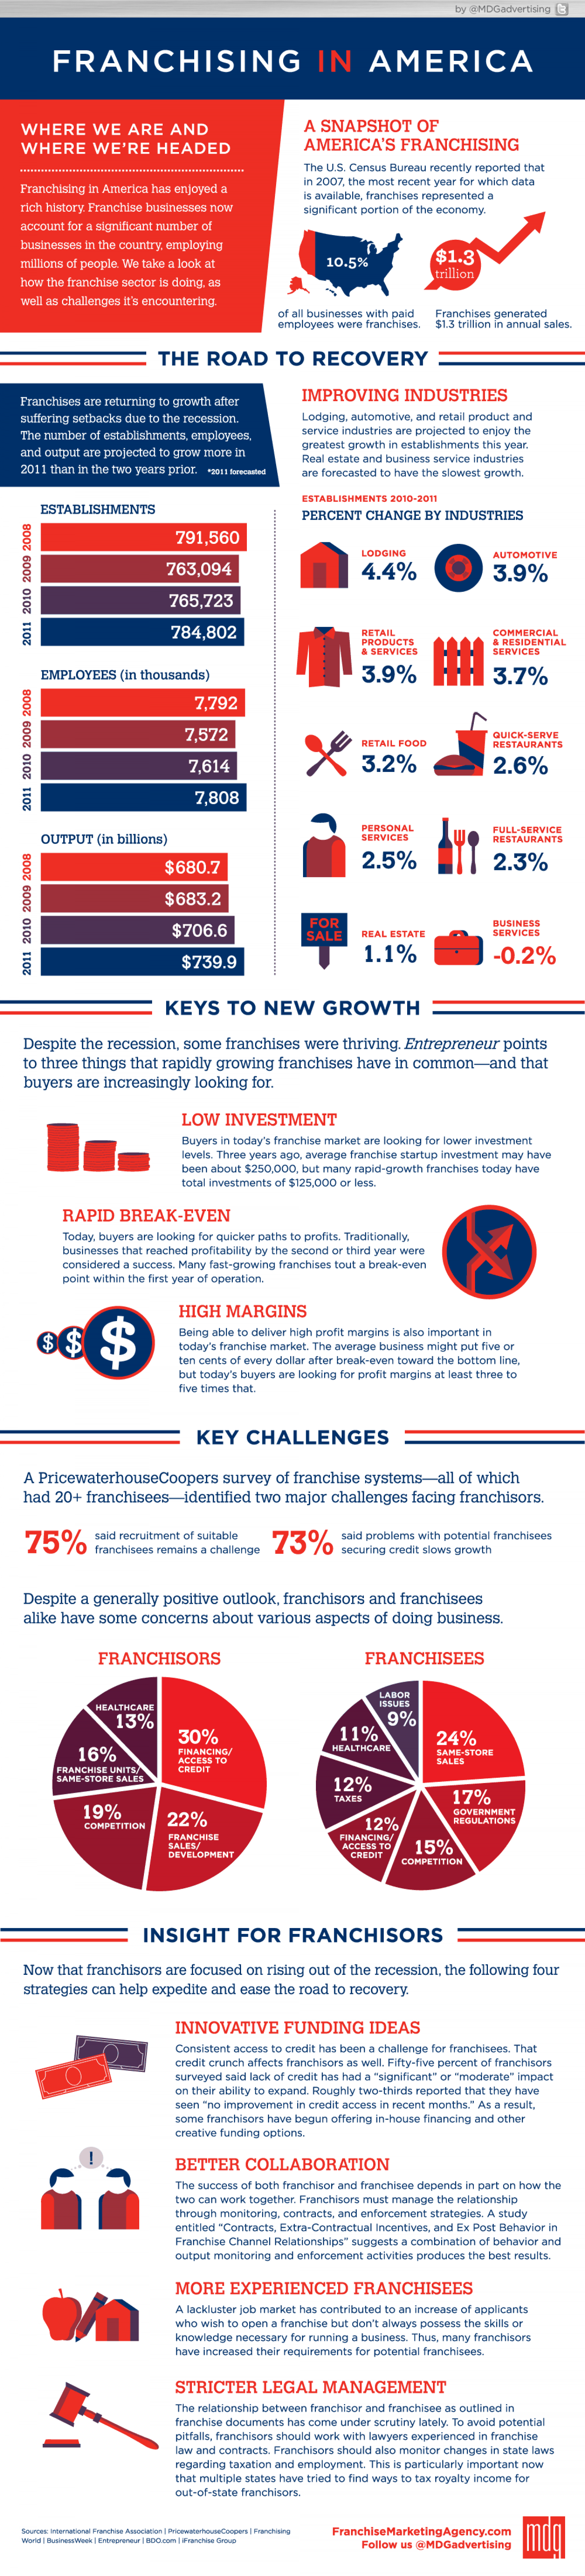 Franchising in America Infographic